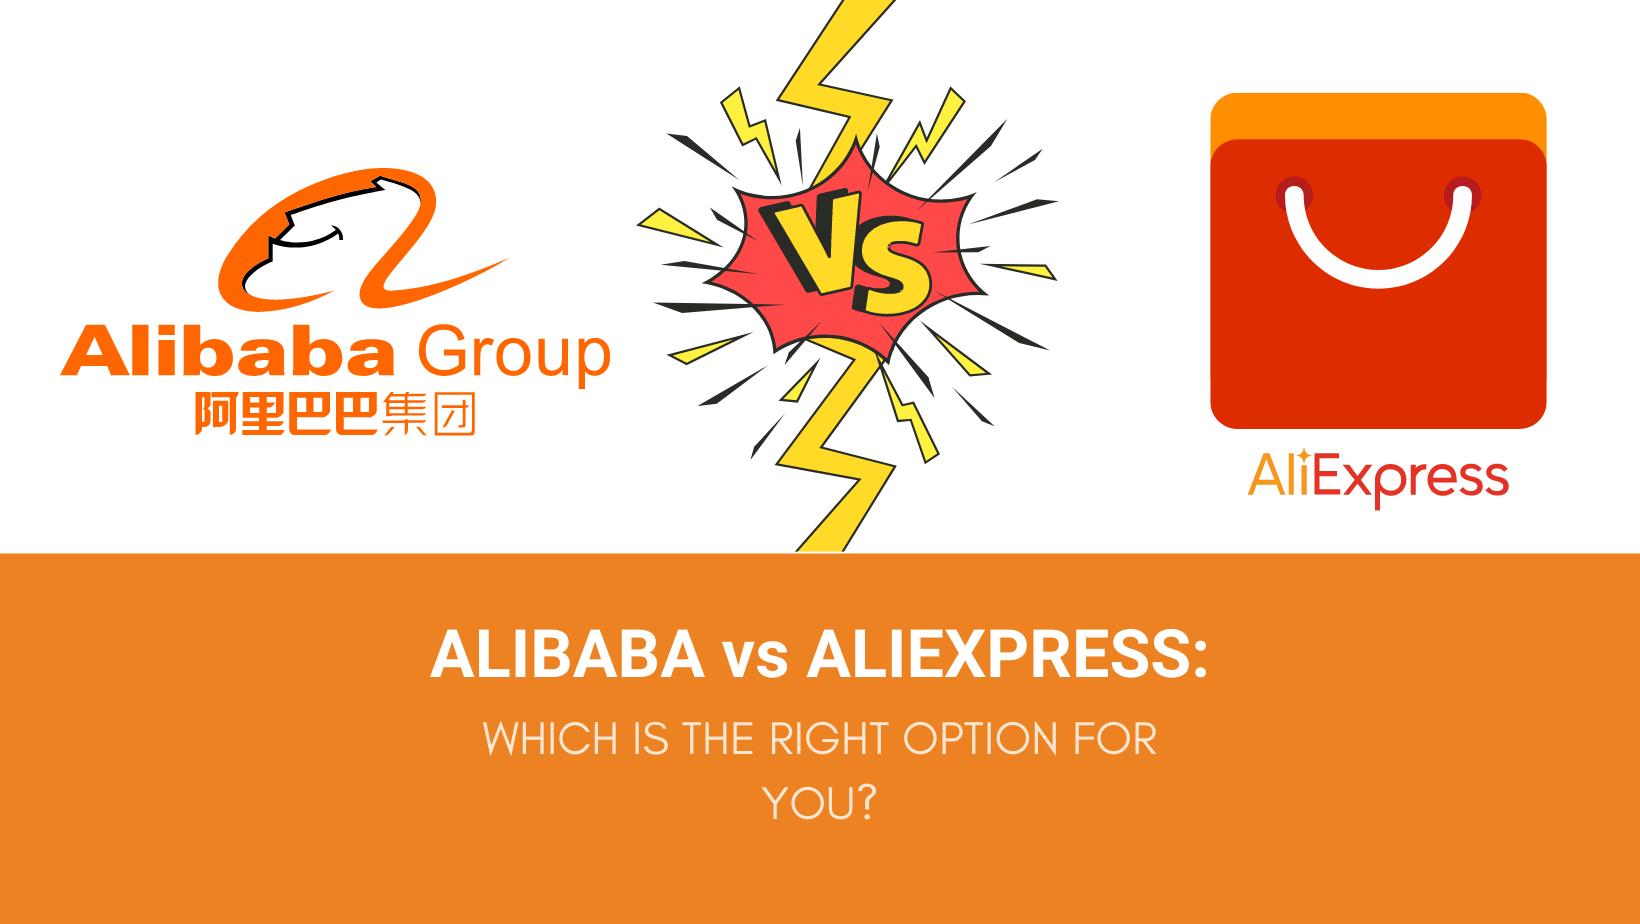 Which is more Cheaper: Alibaba or Aliexpress?